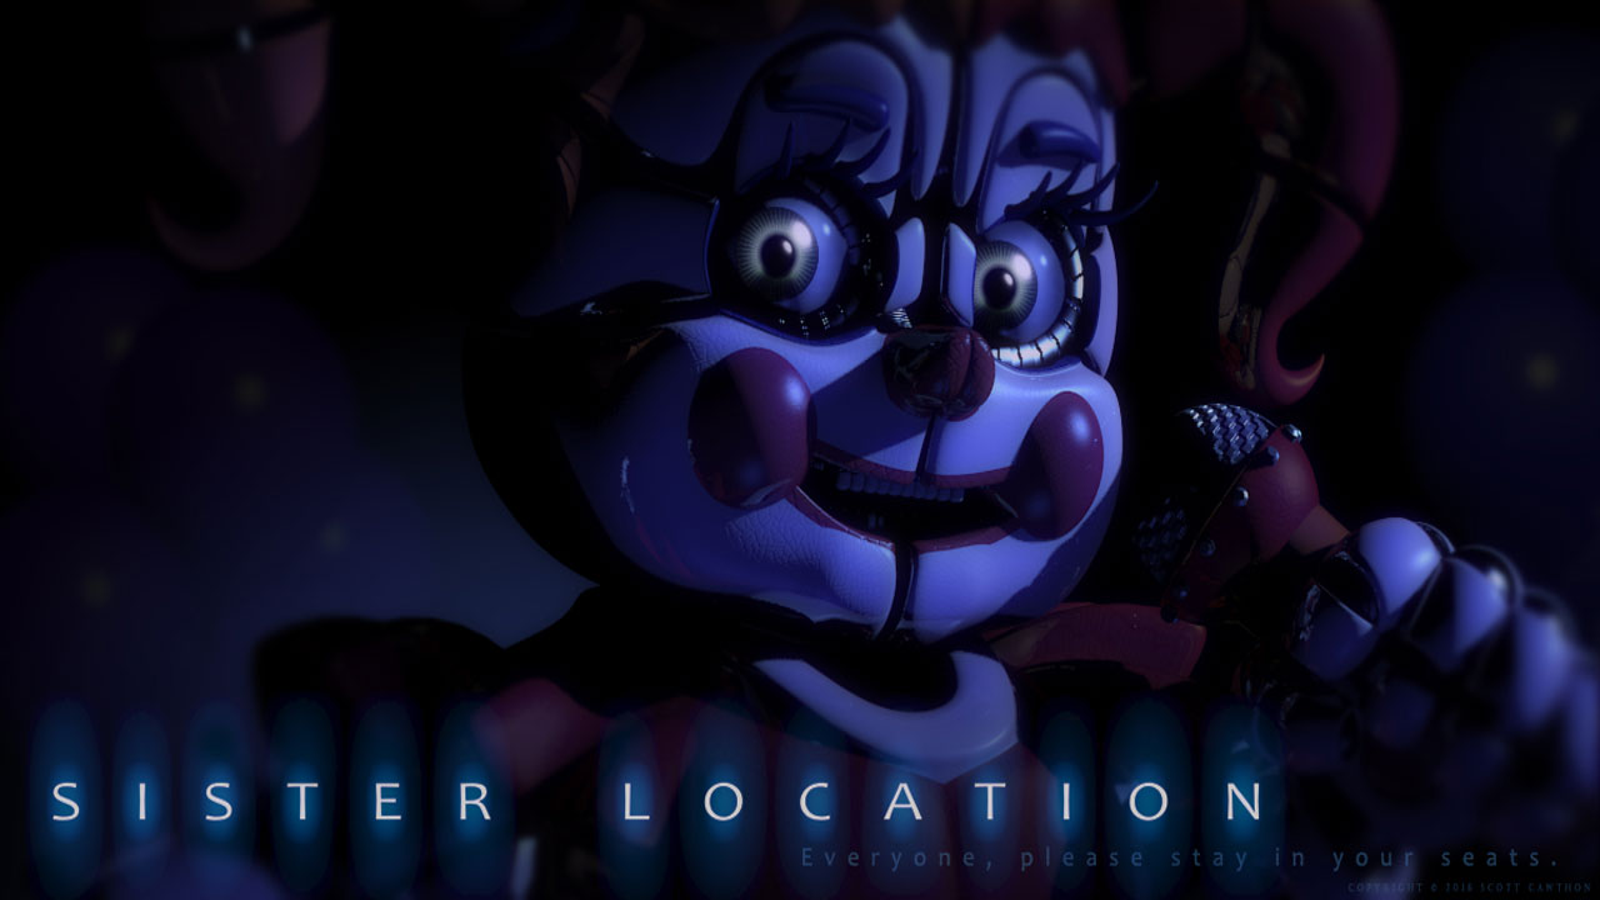 Video Game Five Nights at Freddy's: Sister Location HD Wallpaper